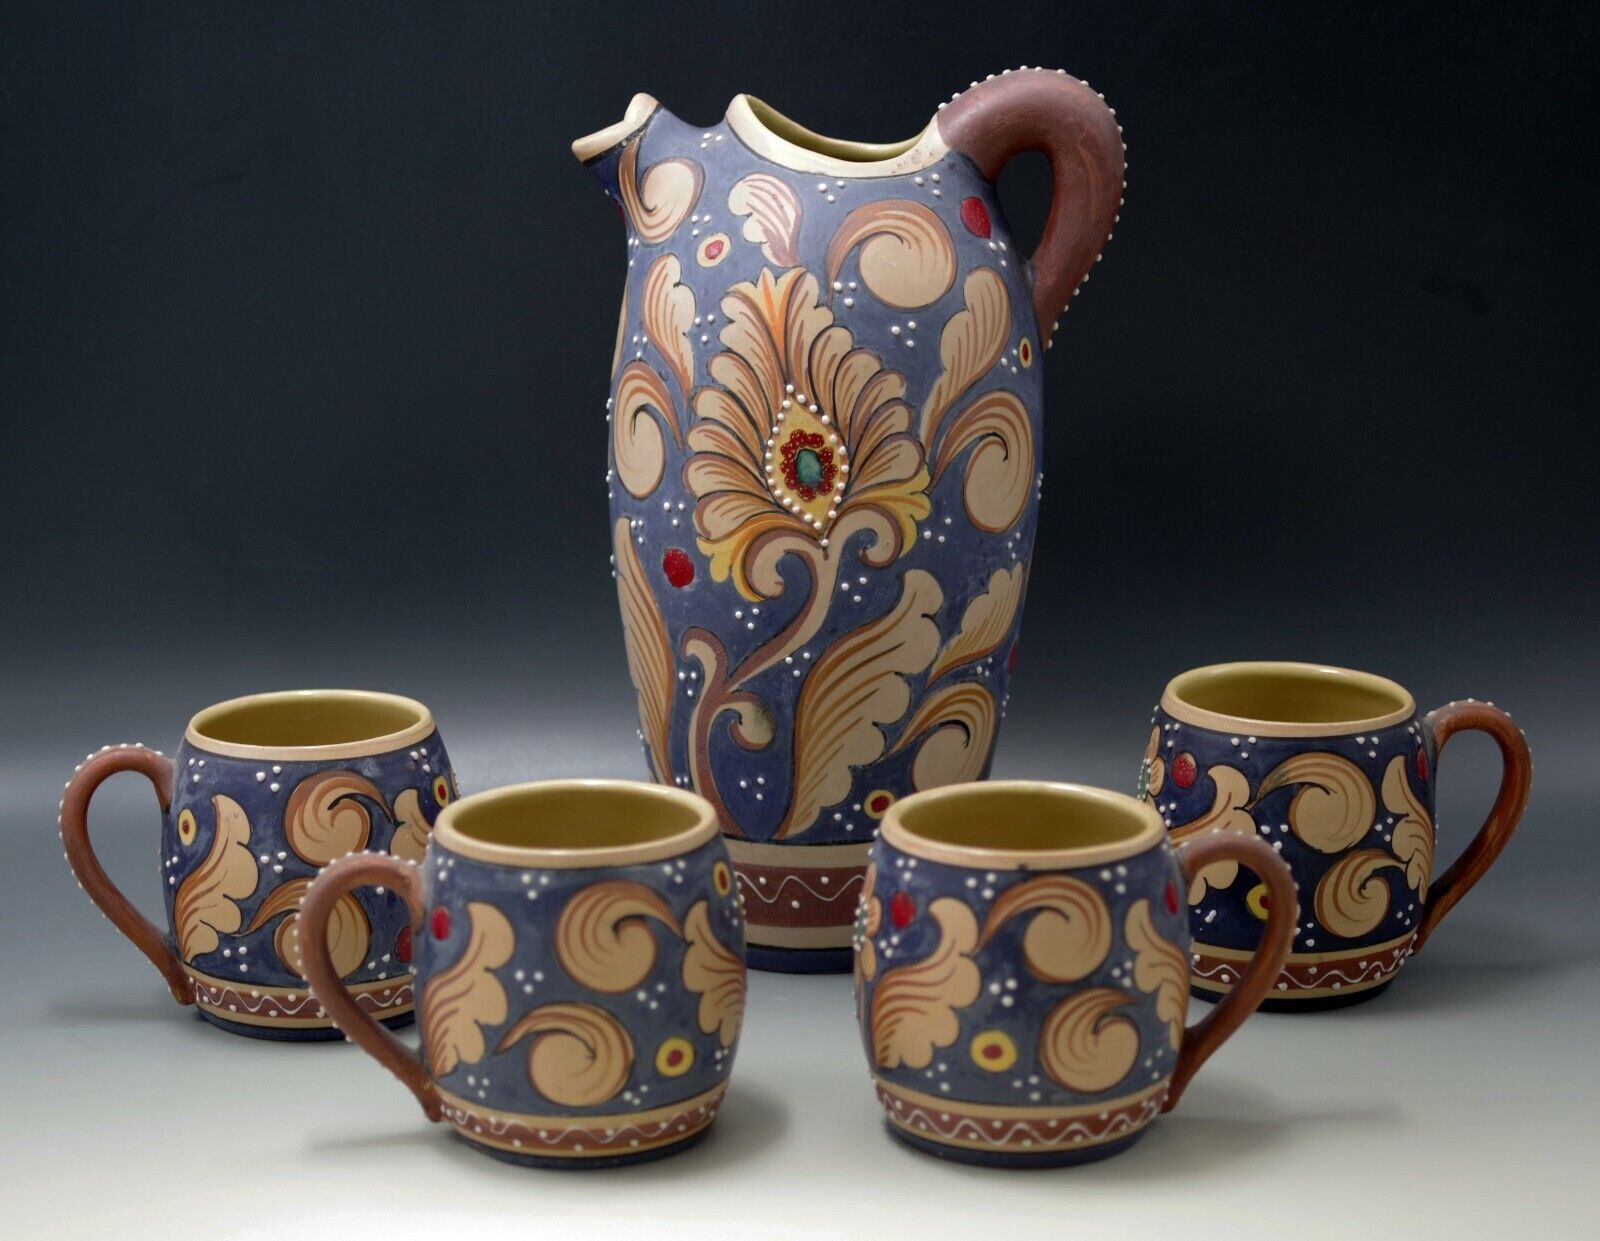 SANTUCCI  DERUTA POTTERY ITALY PEACOCK FEATHER PITCHER AND MUGS SET VINTAGE